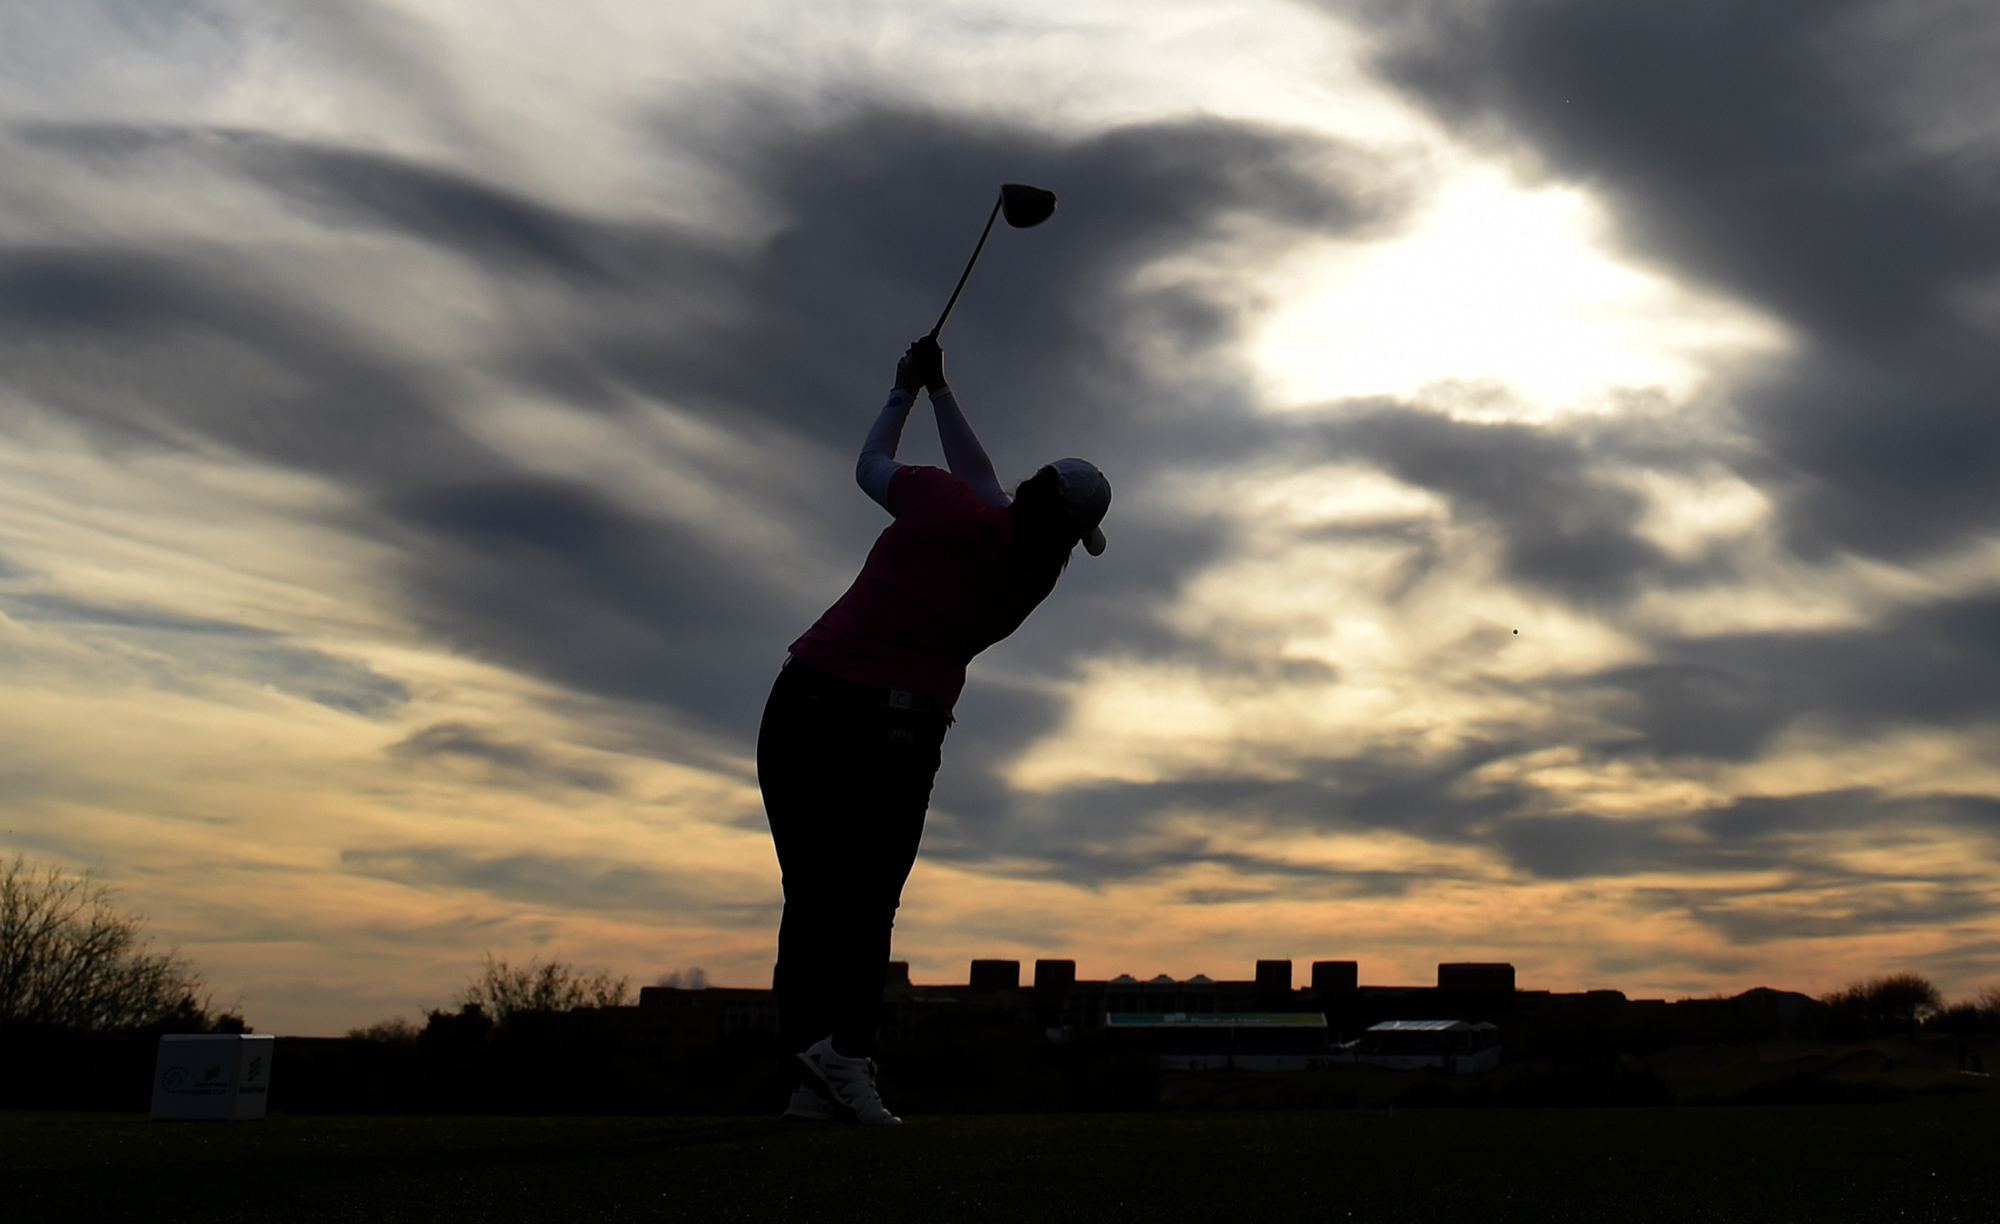 Angel Yin of USA hits her tee shot on the 18th hole during the third round of the Bank Of Hope Founders Cup at the Wildfire Golf Club on March 23, 2019 in Phoenix, Arizona.